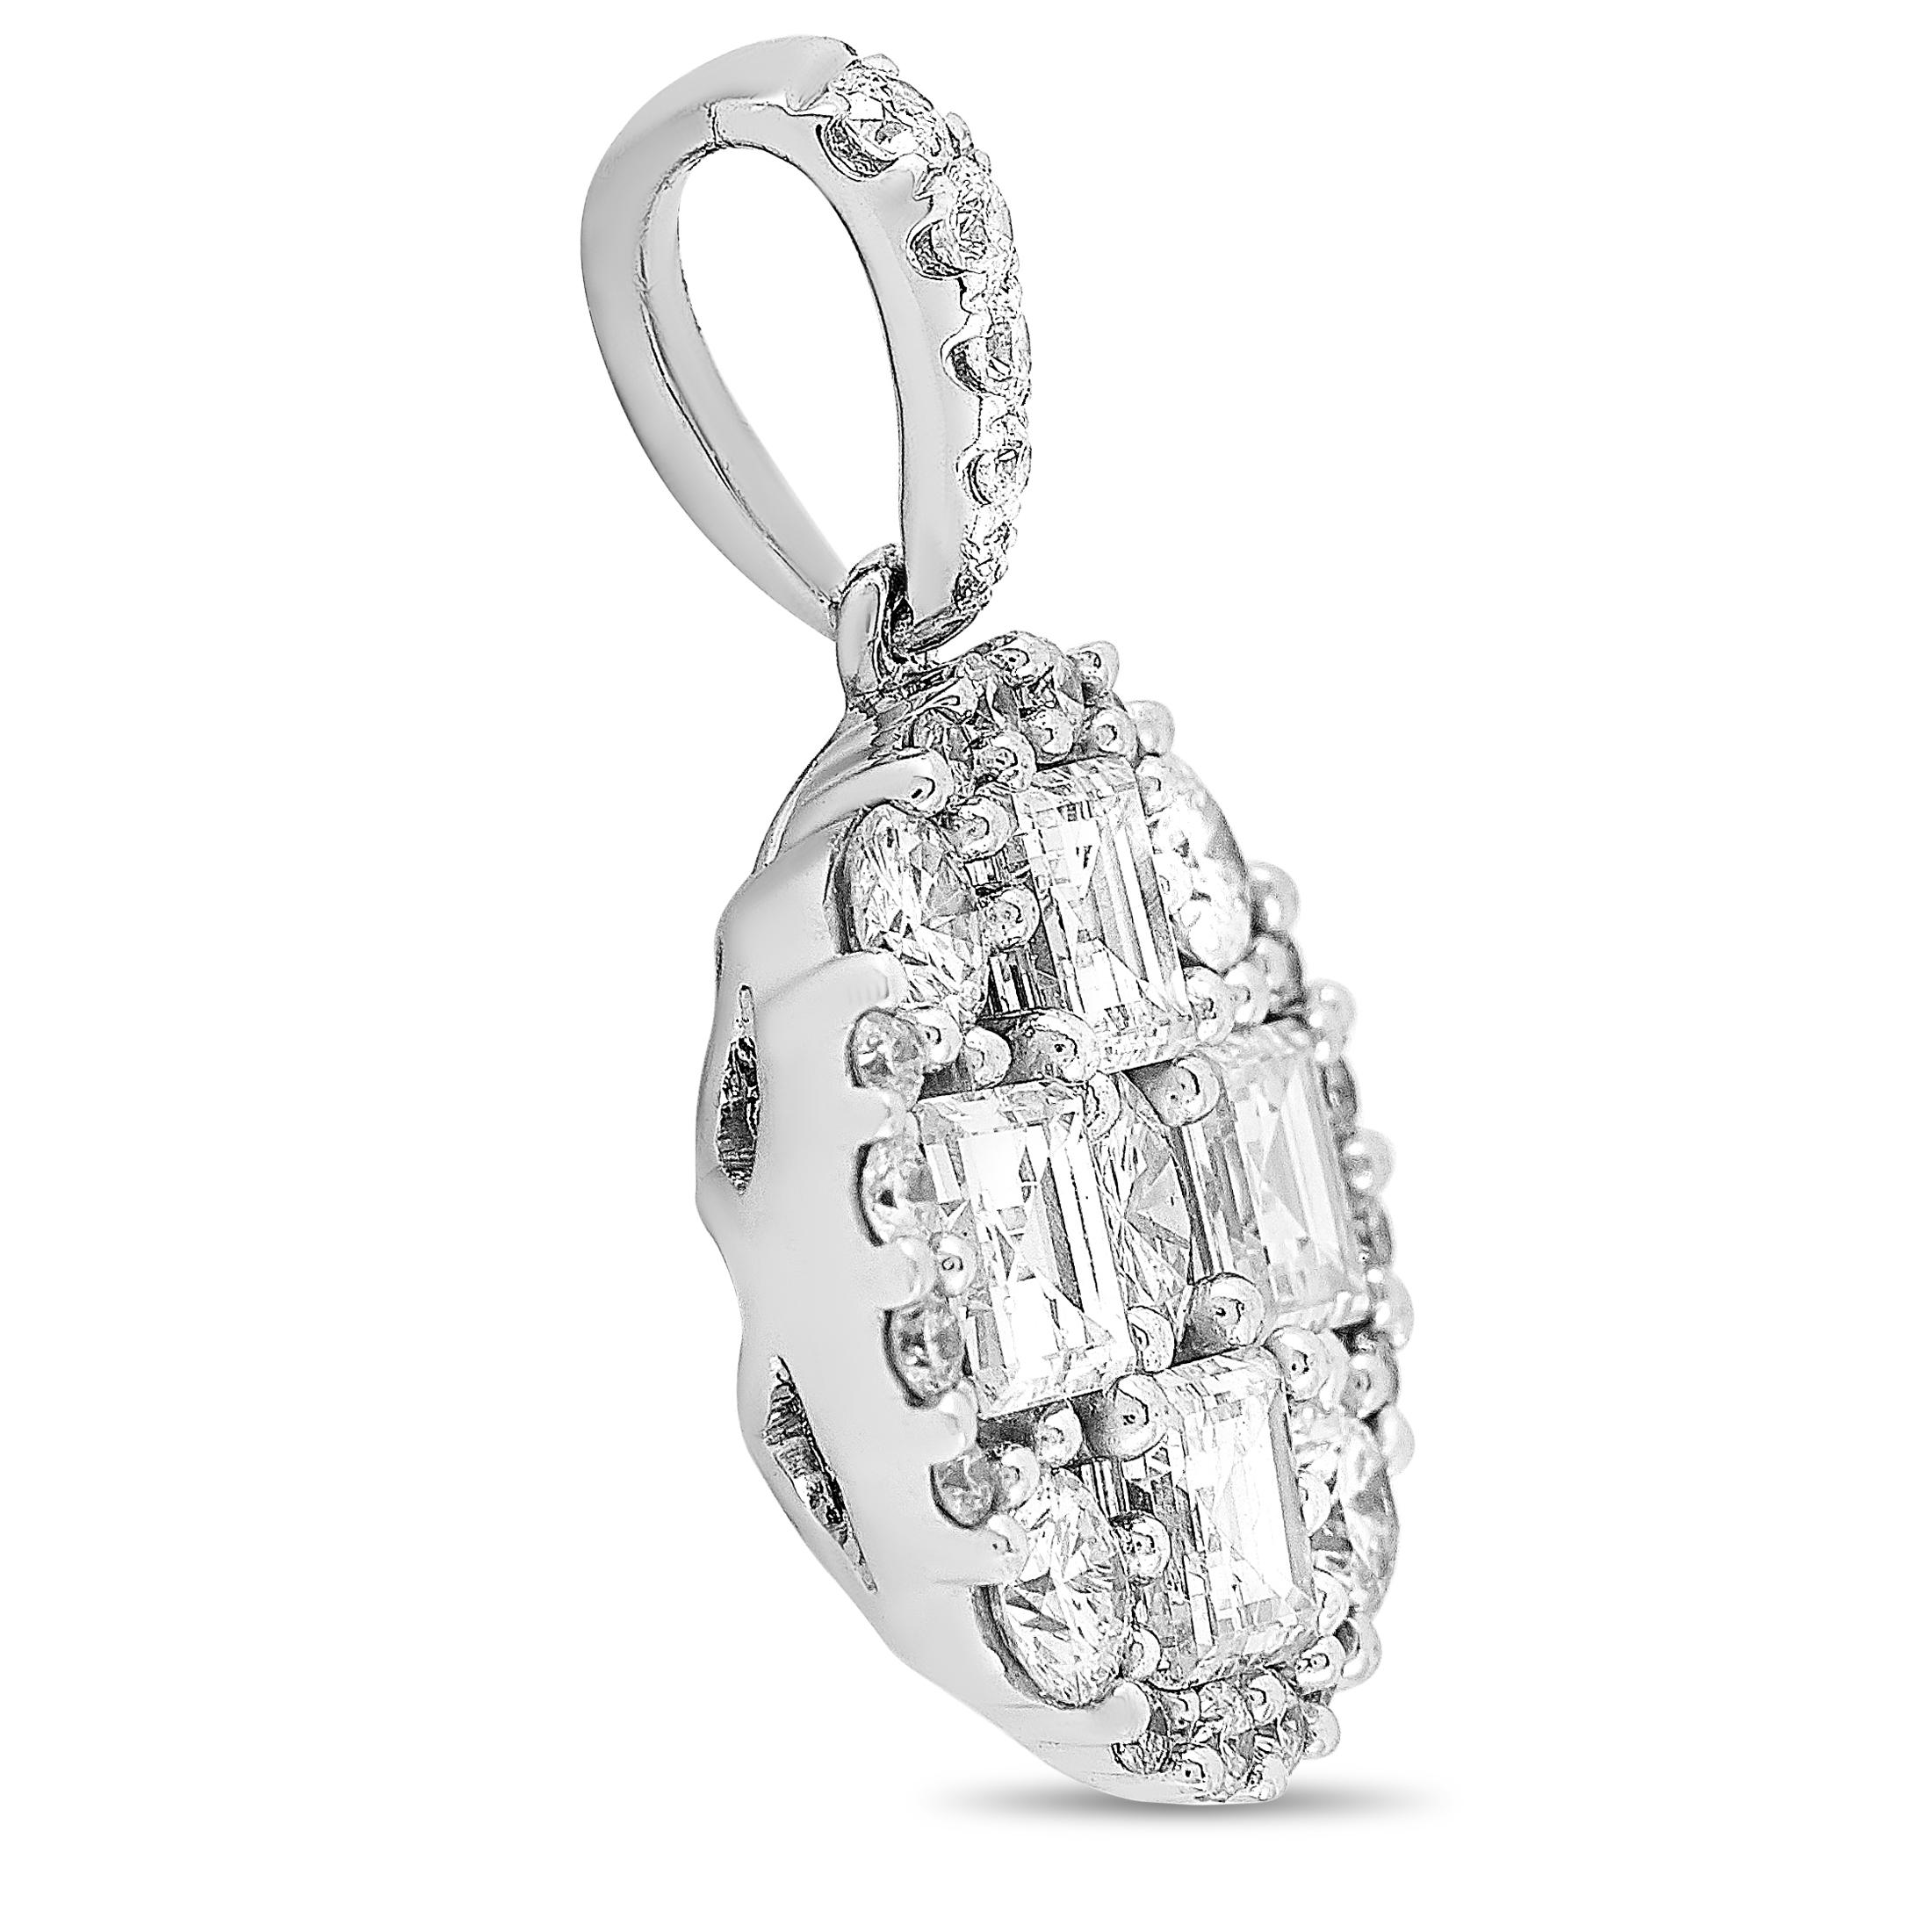 This LB Exclusive pendant is crafted from 18K white gold and weighs 2.7 grams, measuring 0.75” in length and 0.50” in width. The pendant is set with round and asscher diamonds that total 0.50 and 0.71 carats respectively.

Offered in brand new